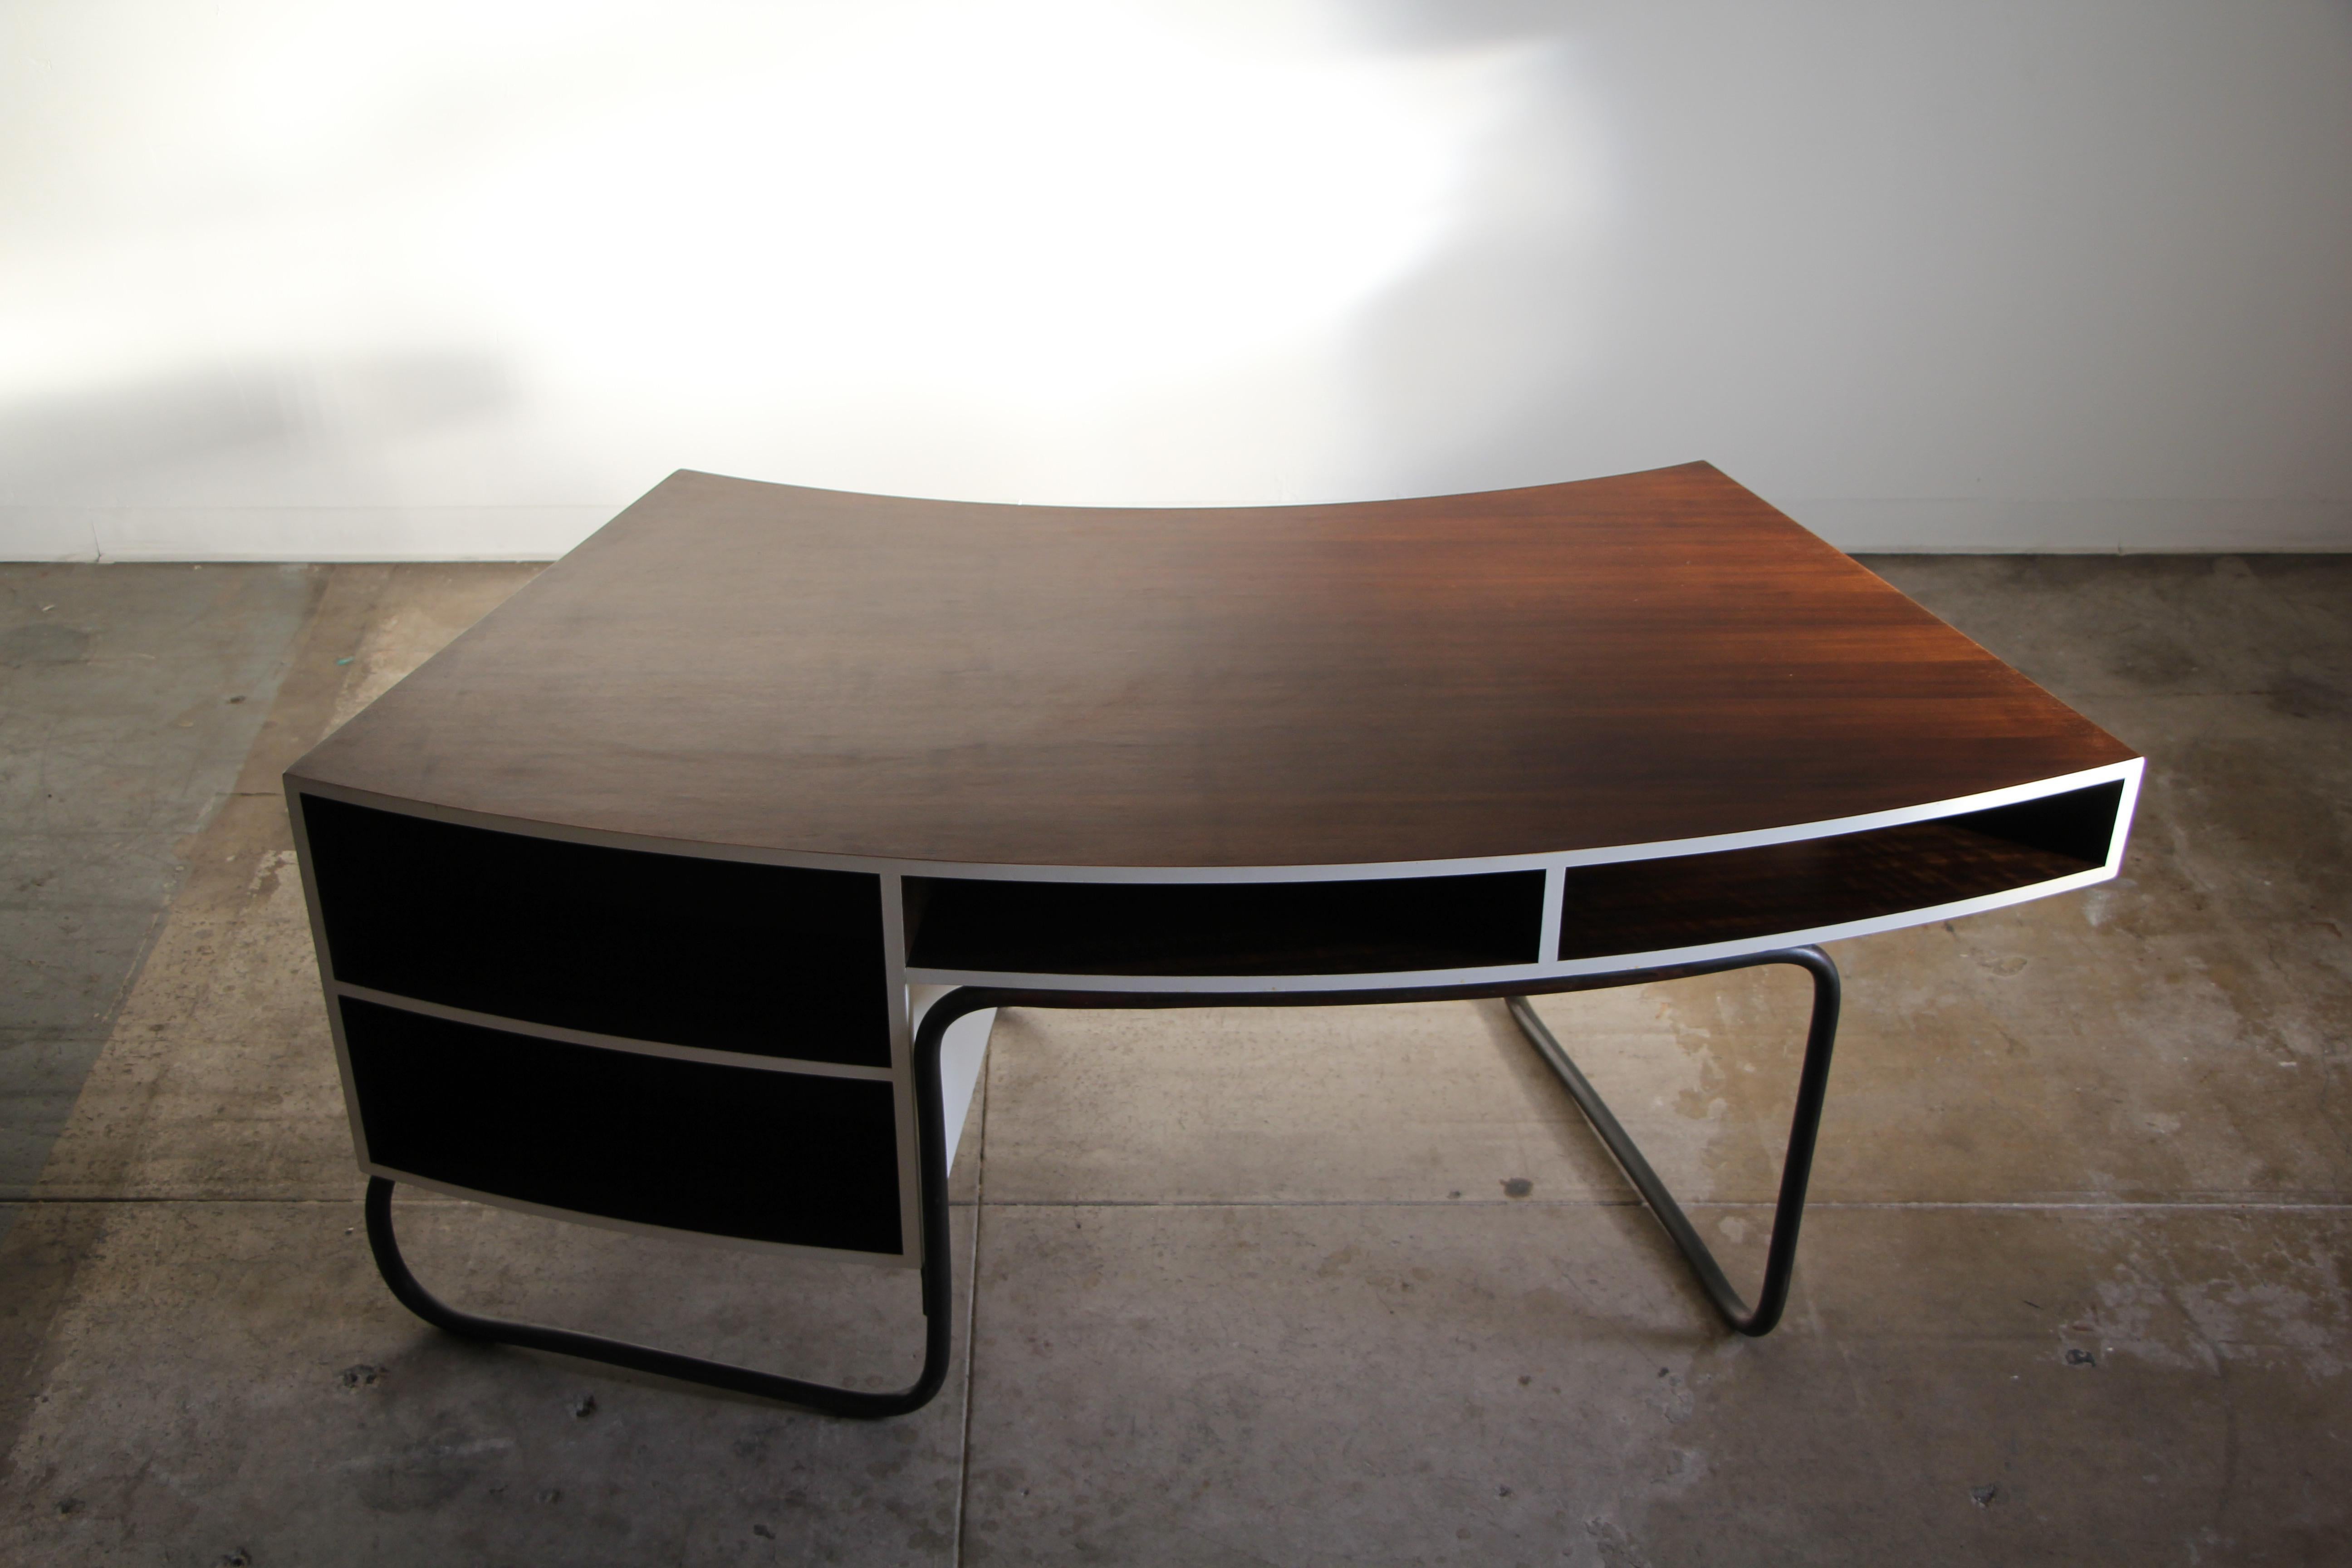 Serge Chermayeff One-of-a-Kind Curved Desk from the BBC Building 1930s In Good Condition For Sale In Coronado, CA